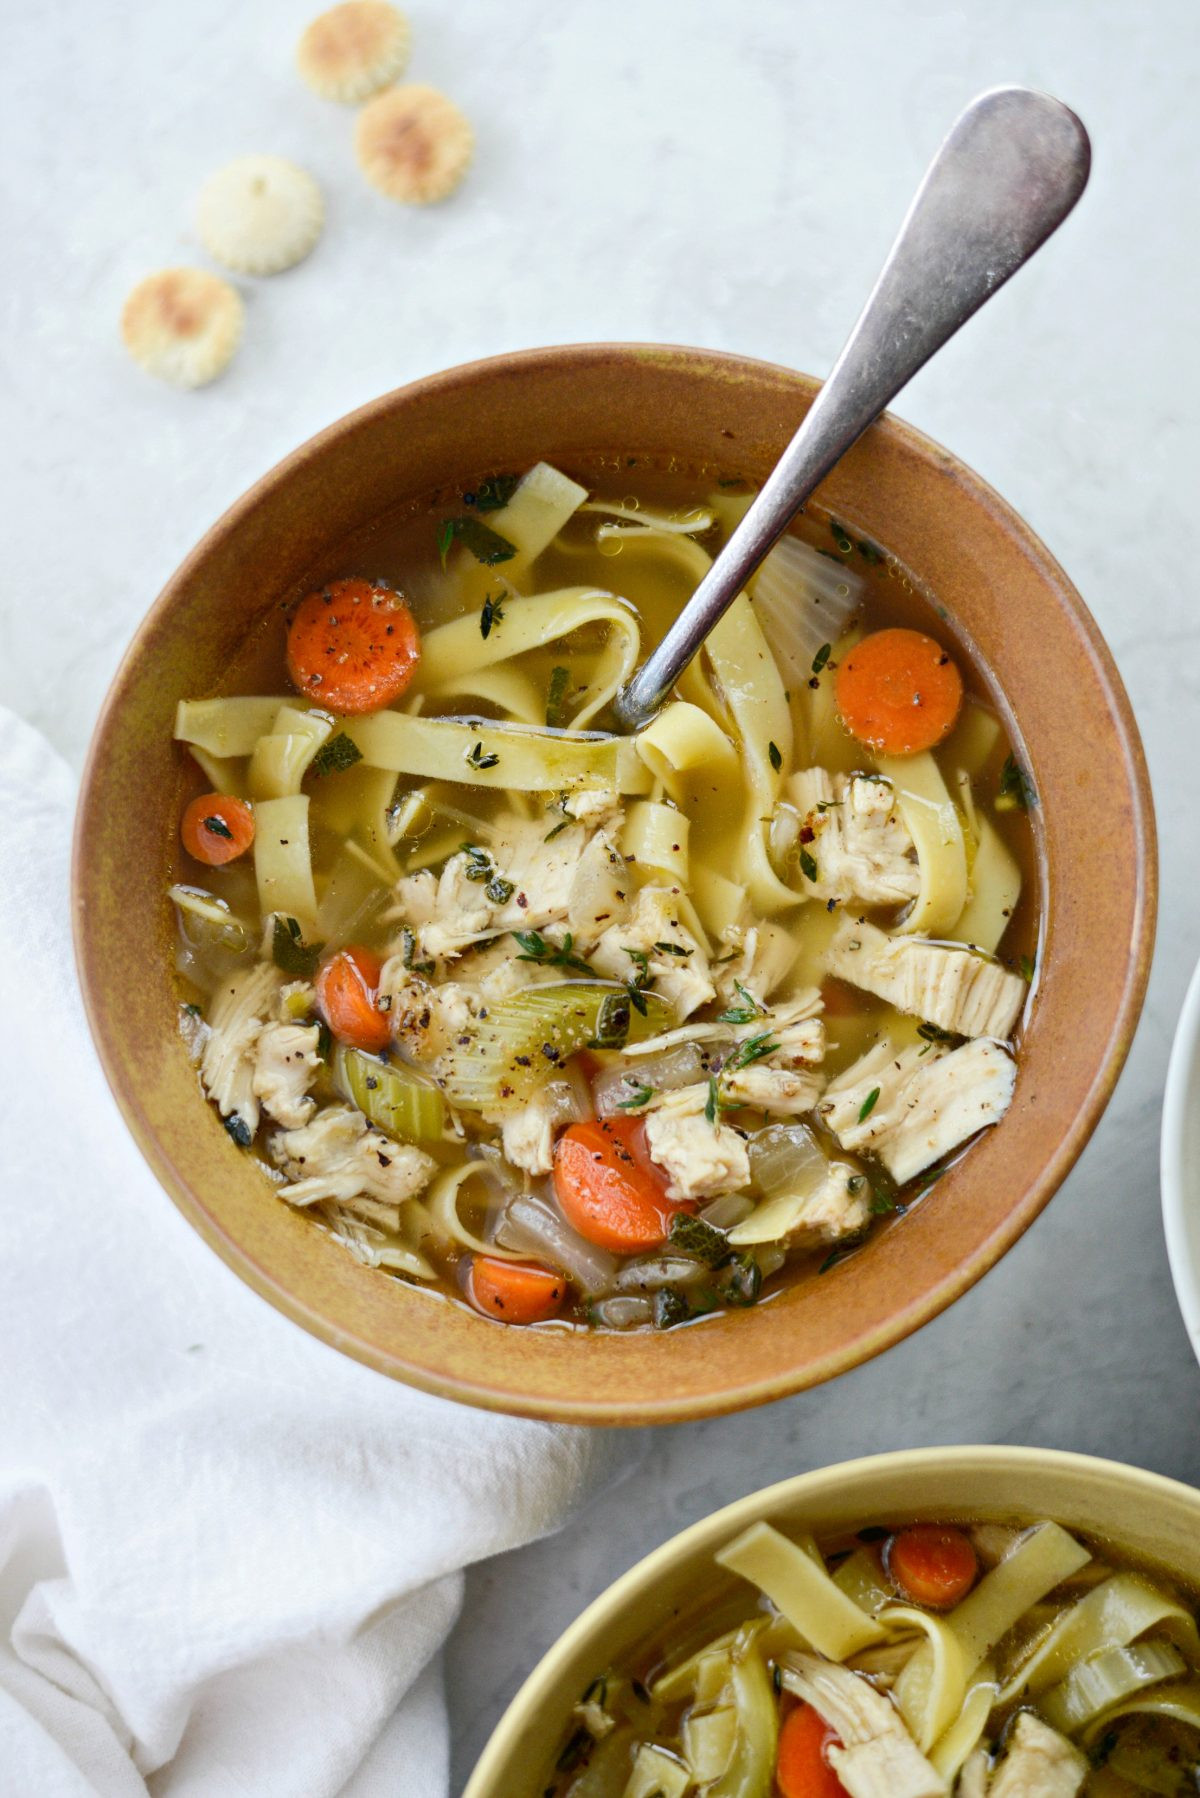 15 Of the Best Ideas for Turkey soup From Leftover